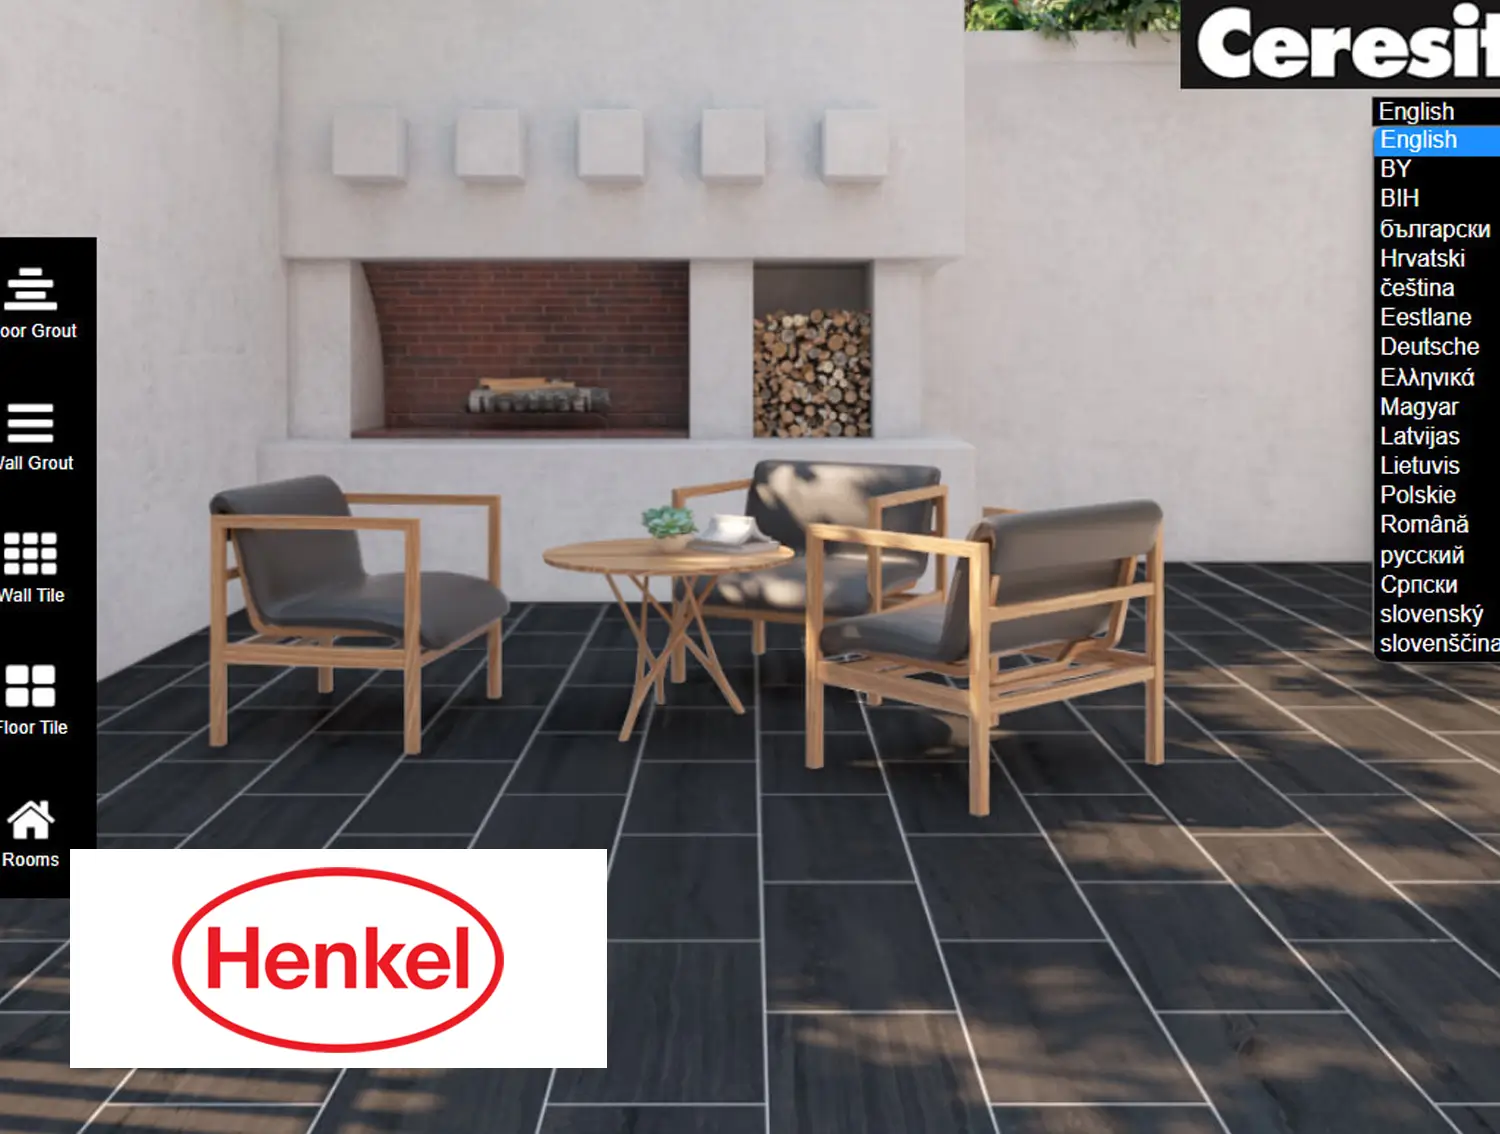 Henkel – Witnessed Boost in Sales with VR-Based Visualizer App